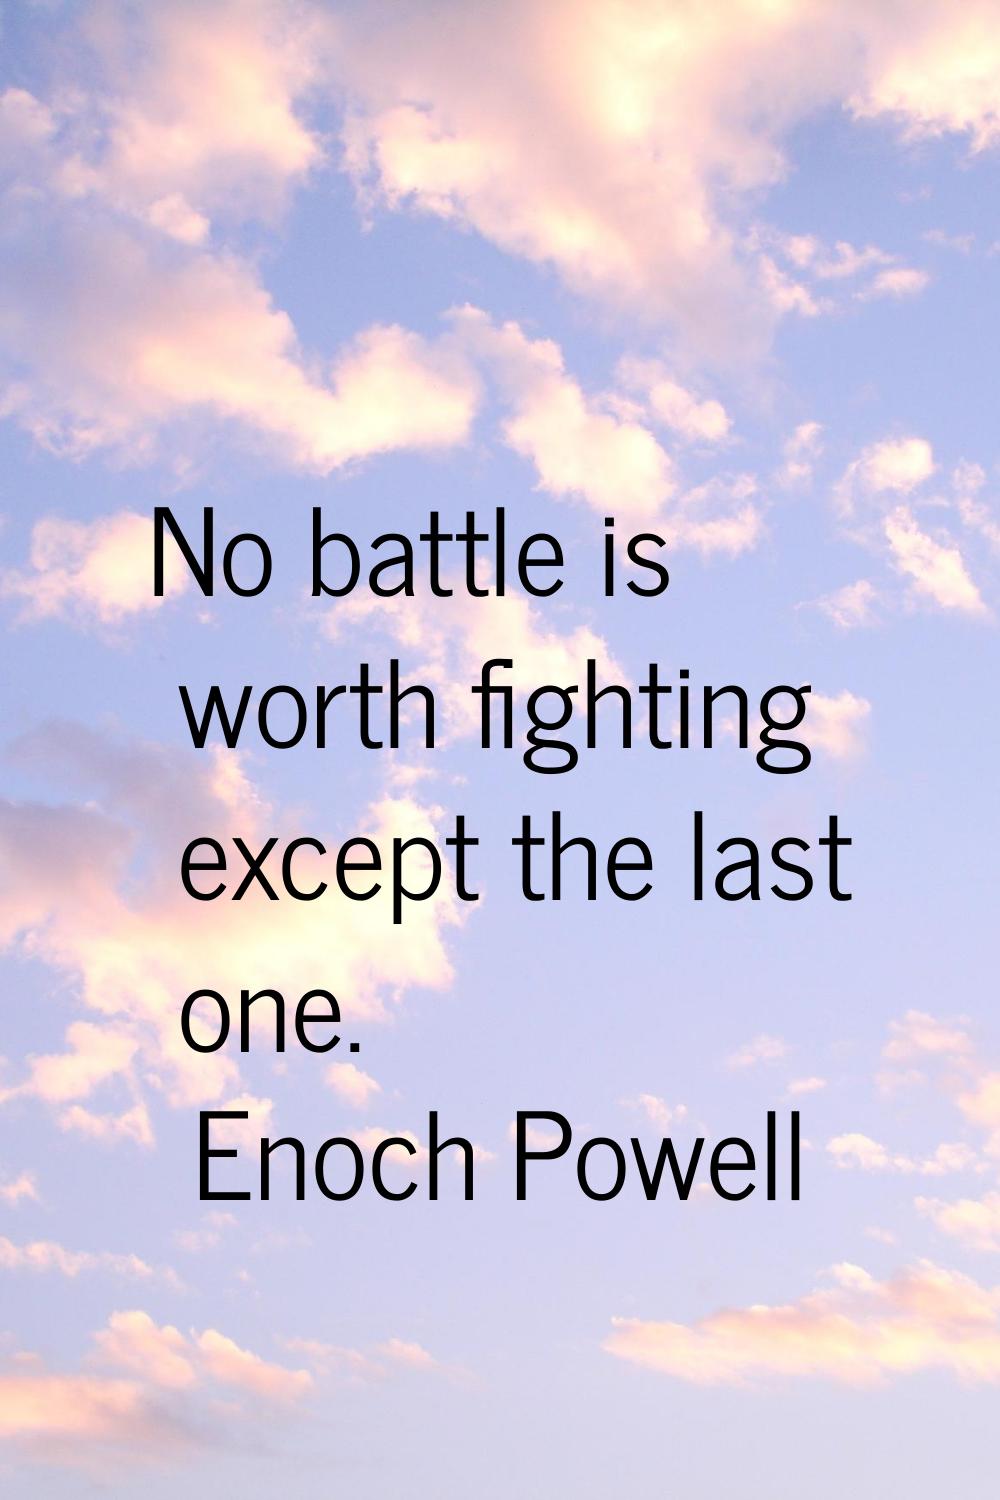 No battle is worth fighting except the last one.